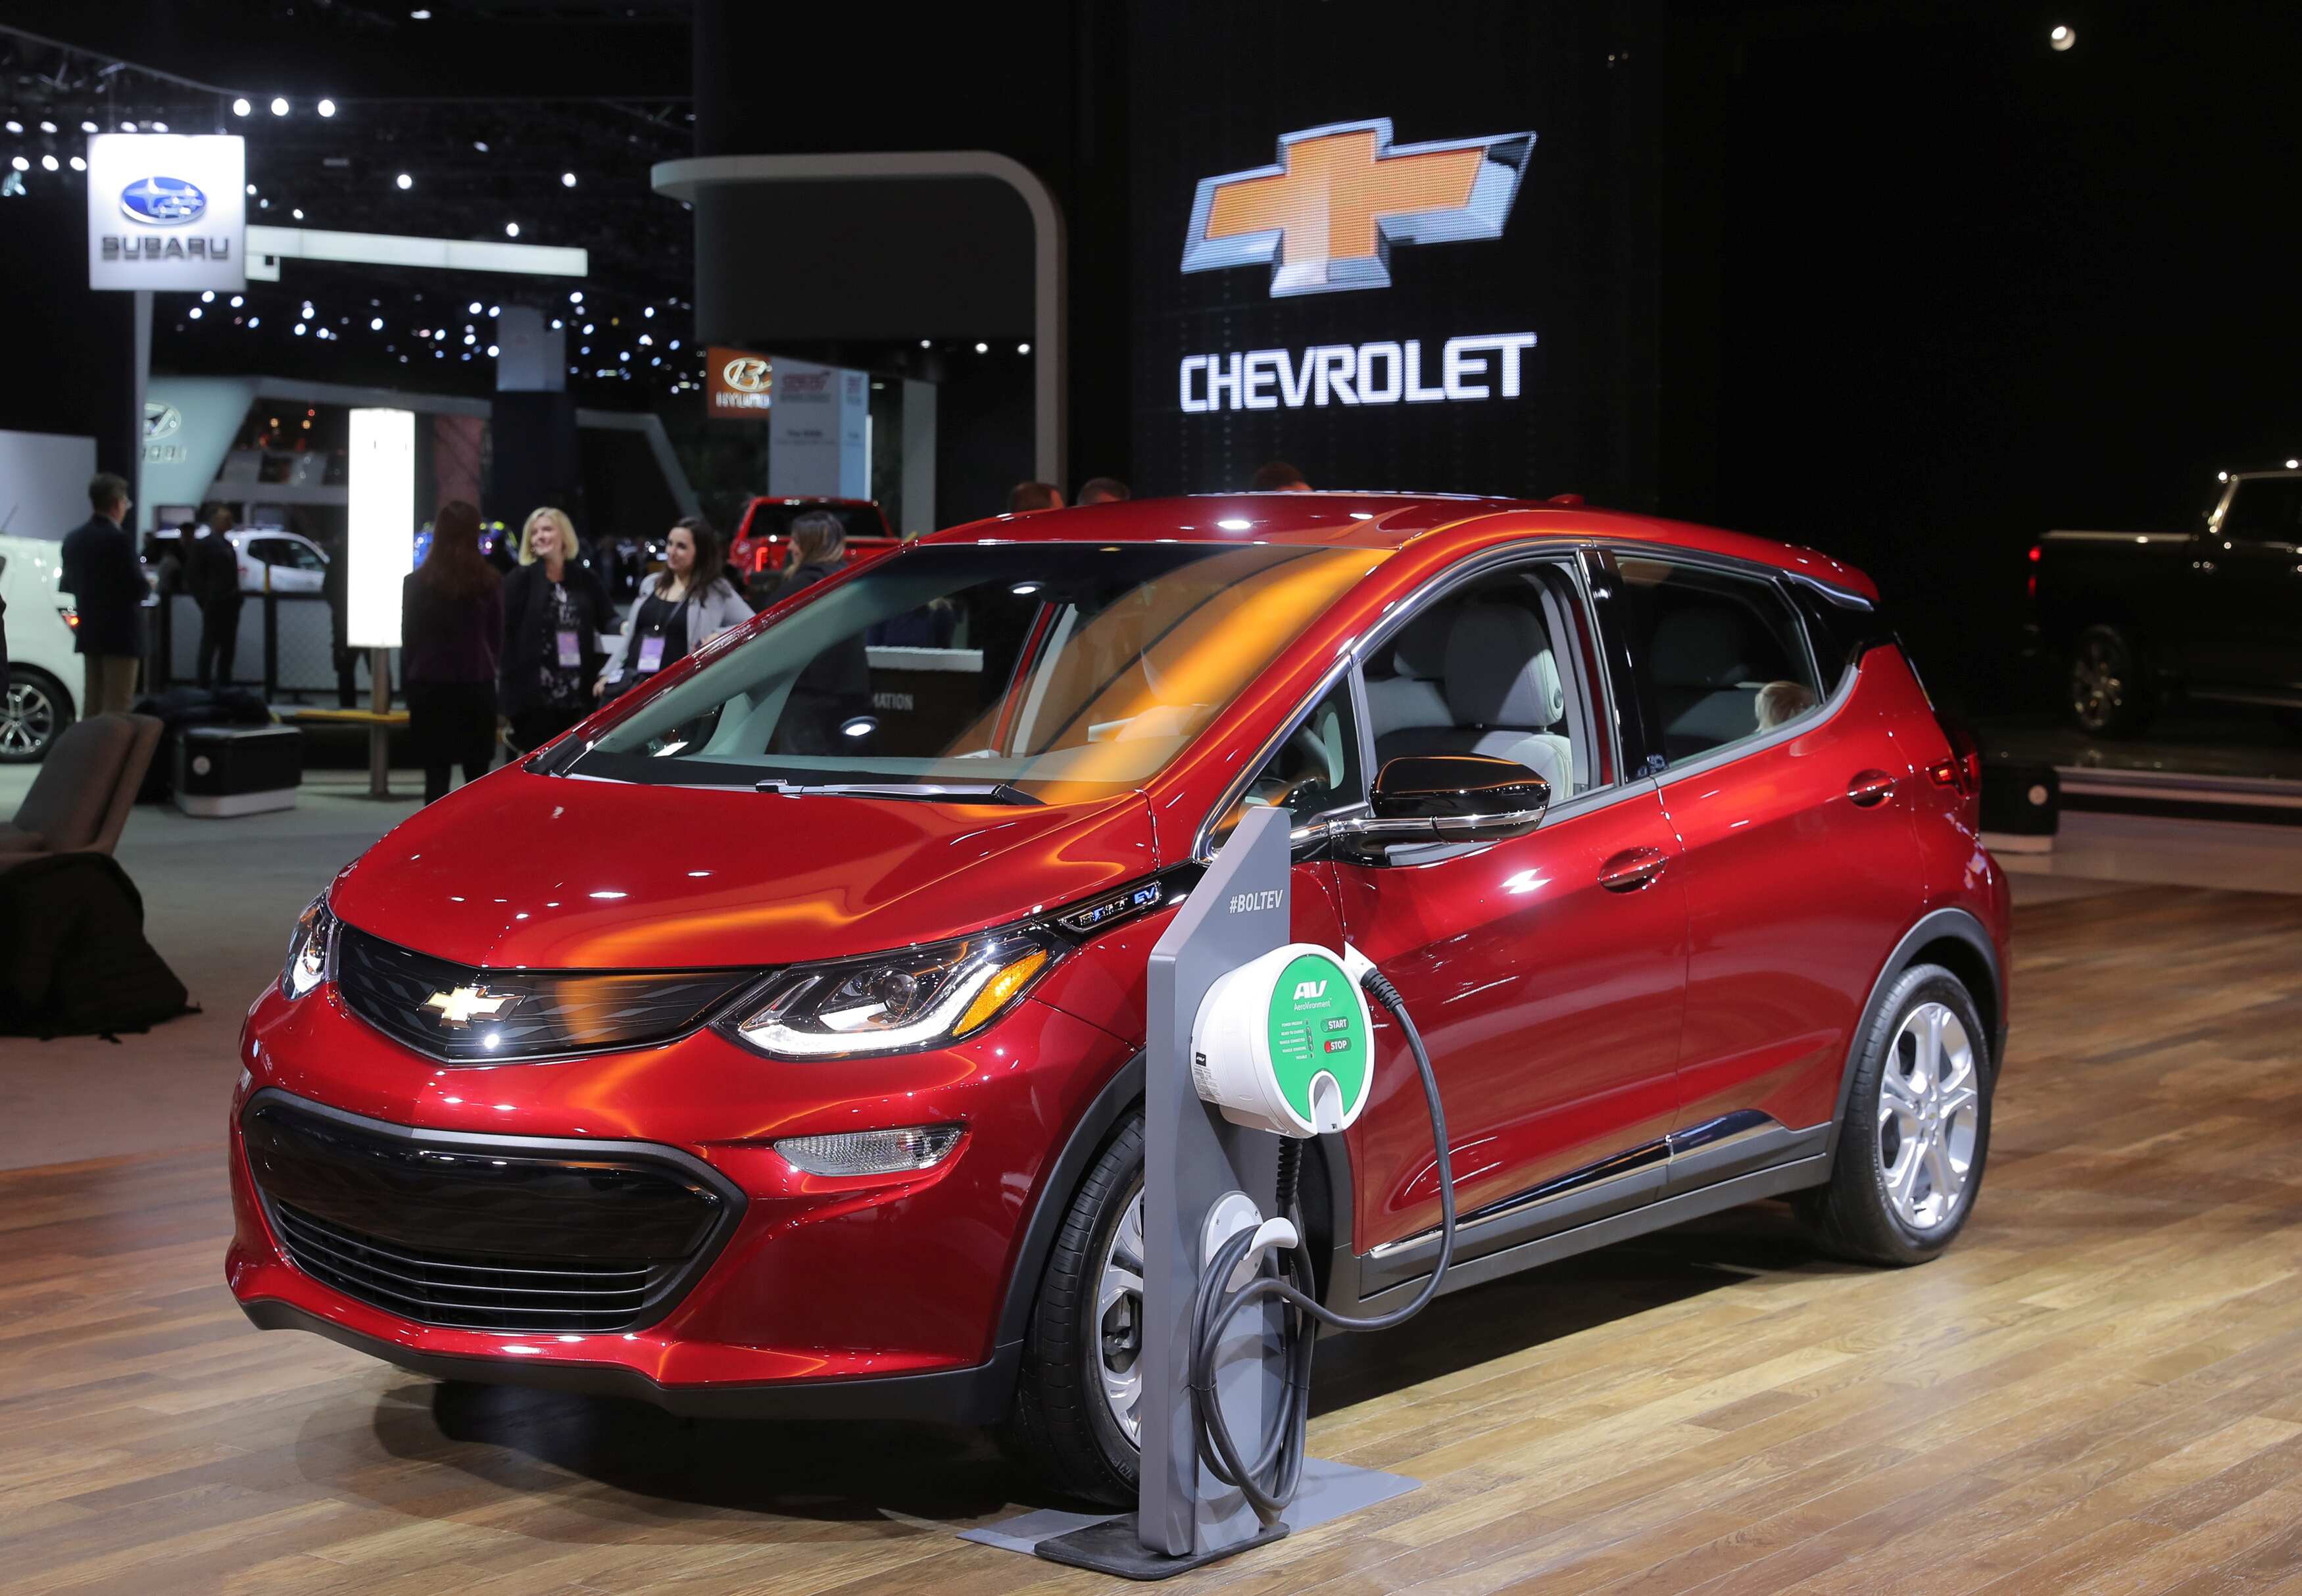 General Motors says no cut in Chevrolet Bolt sticker price as US tax